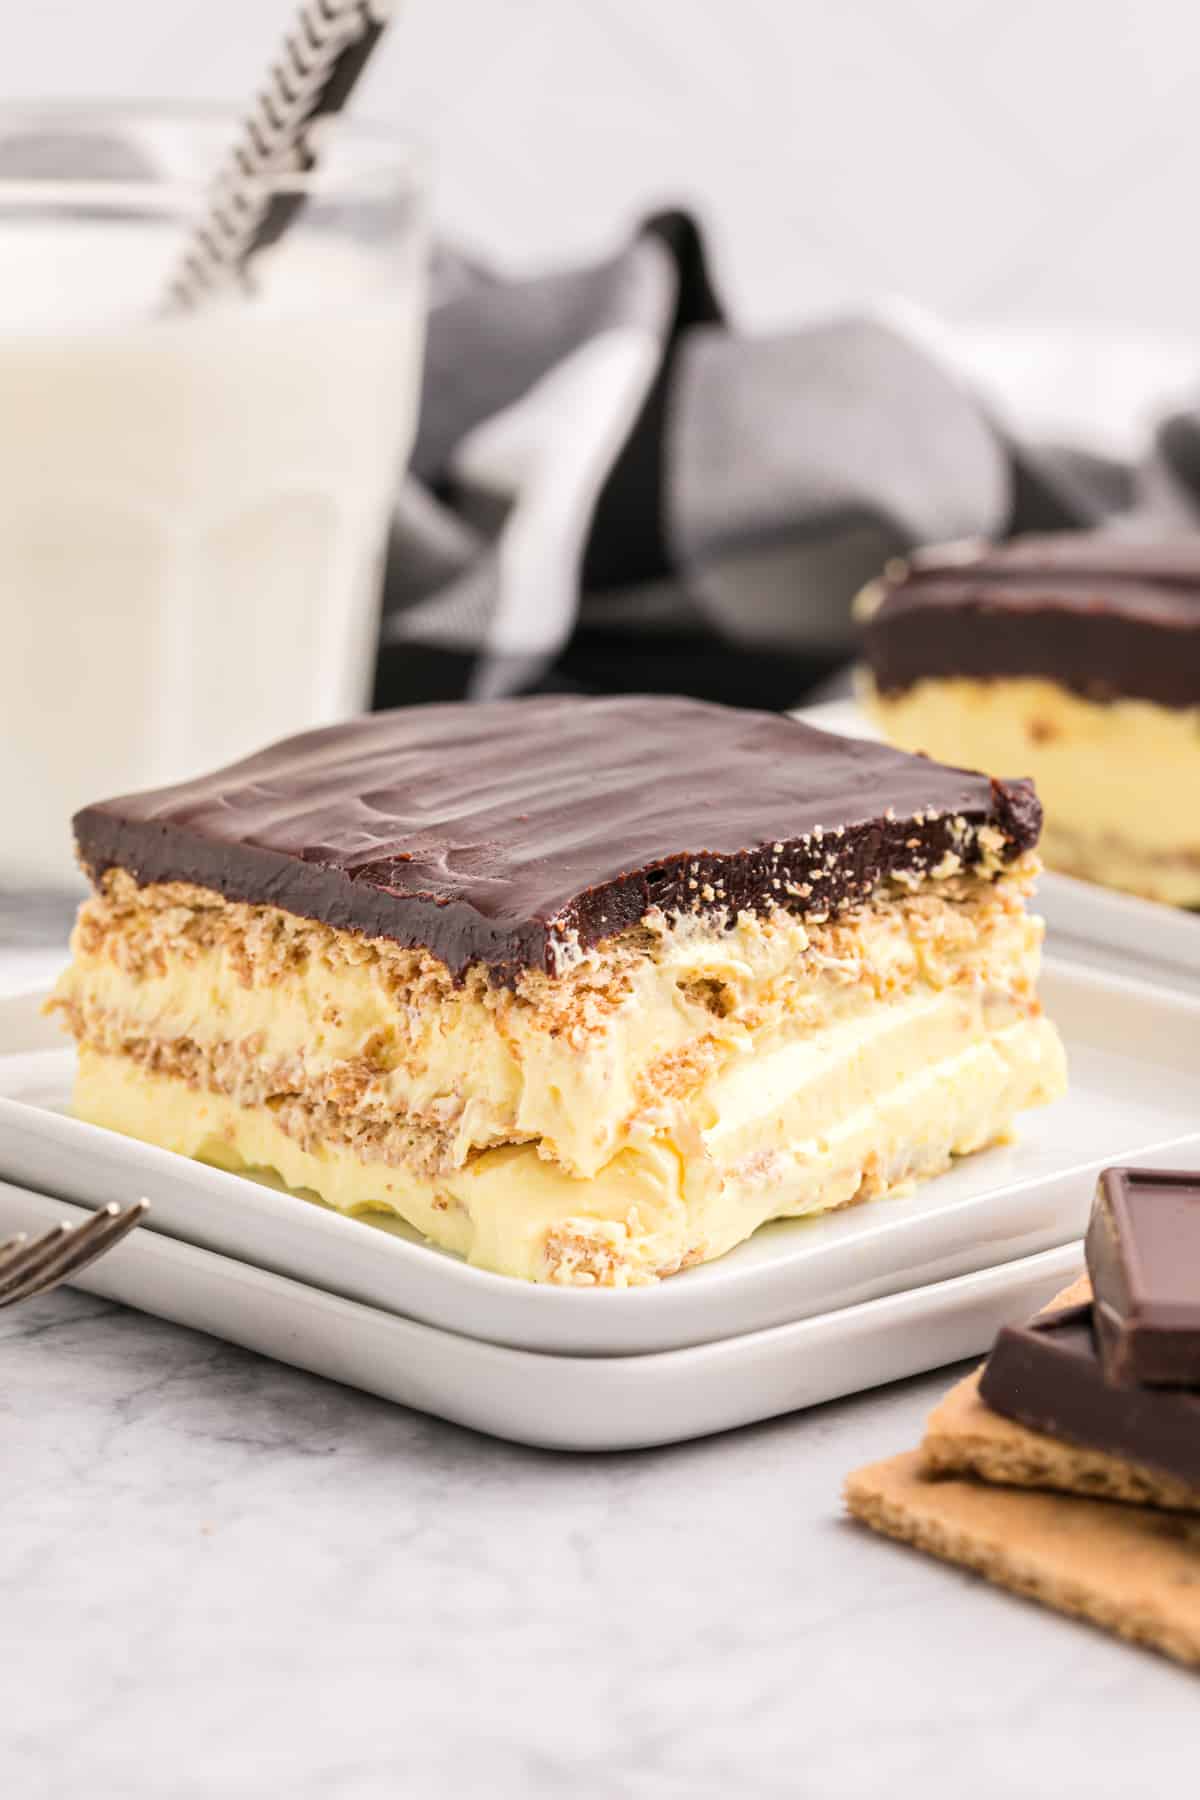 A slice of eclair cake is presented on a white plate in front of a glass of milk.